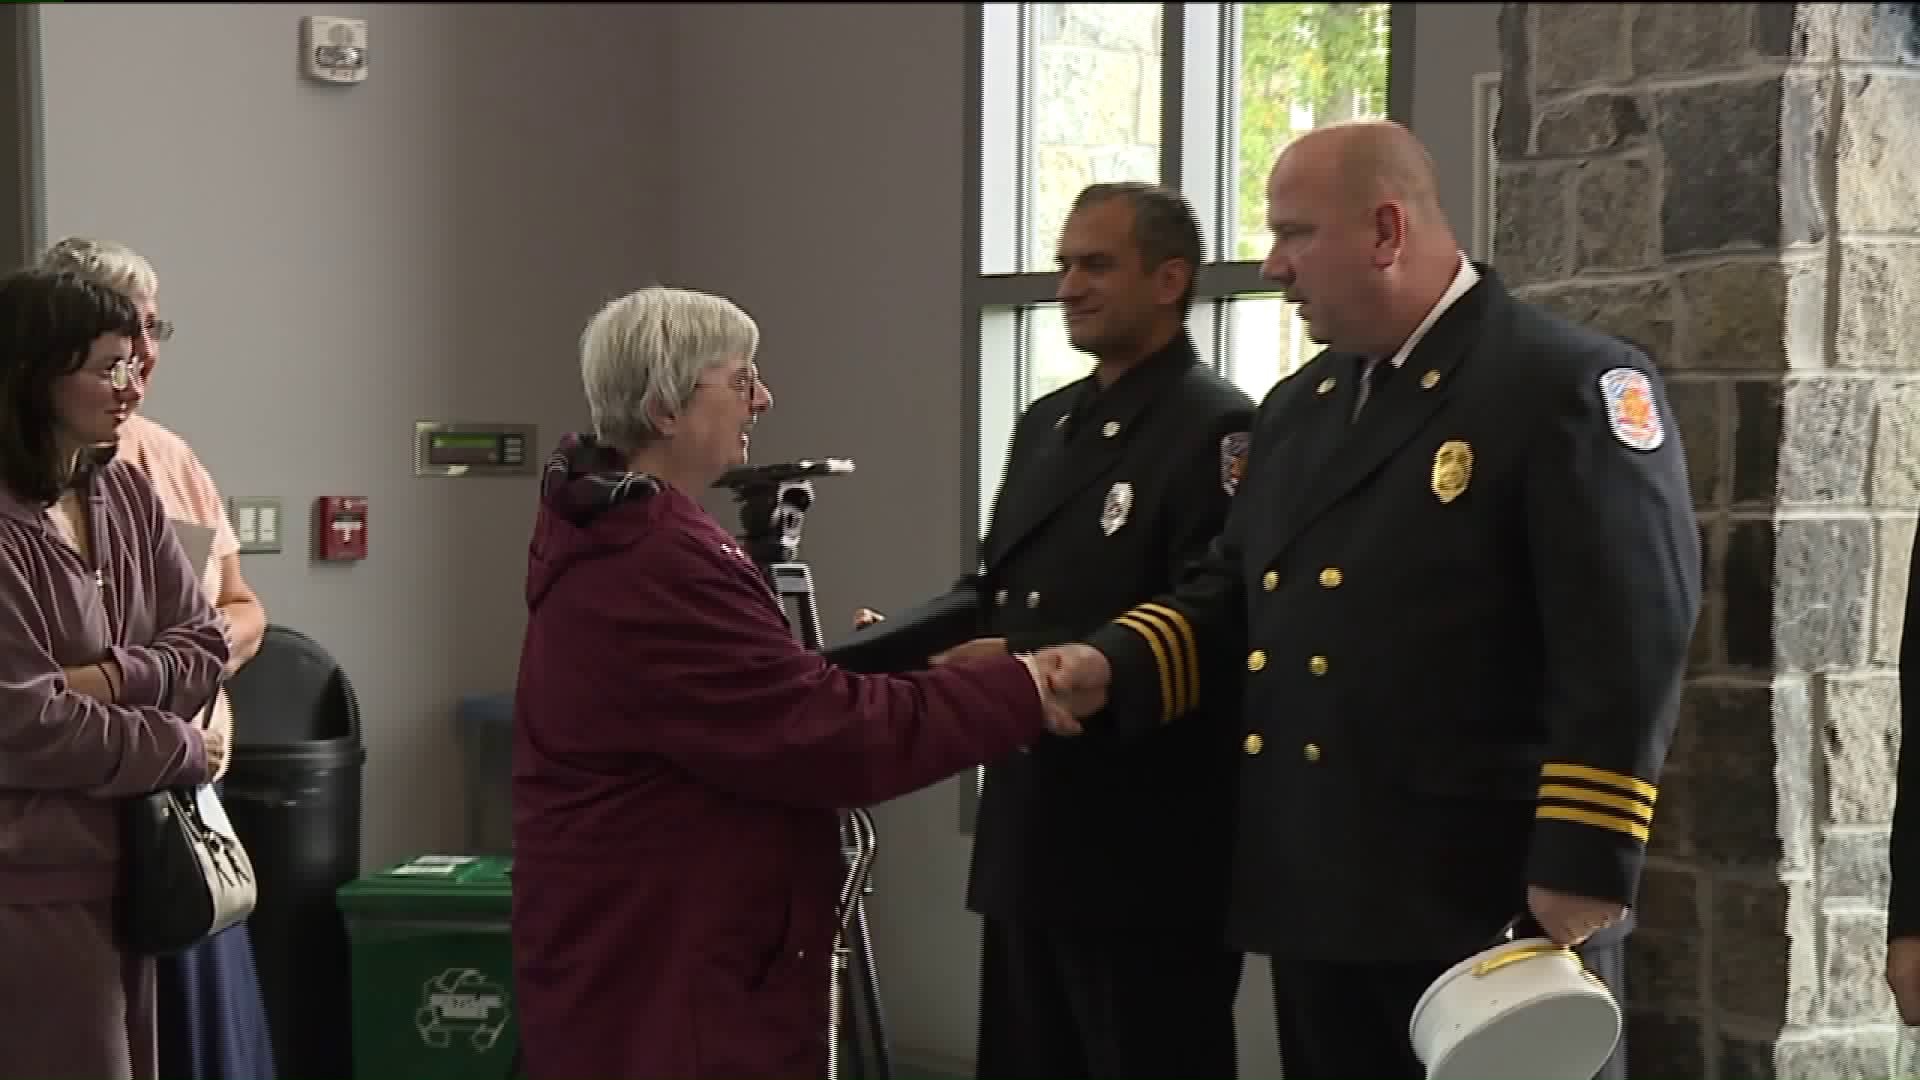 Firefighters Honored For Saving Woman From Fire